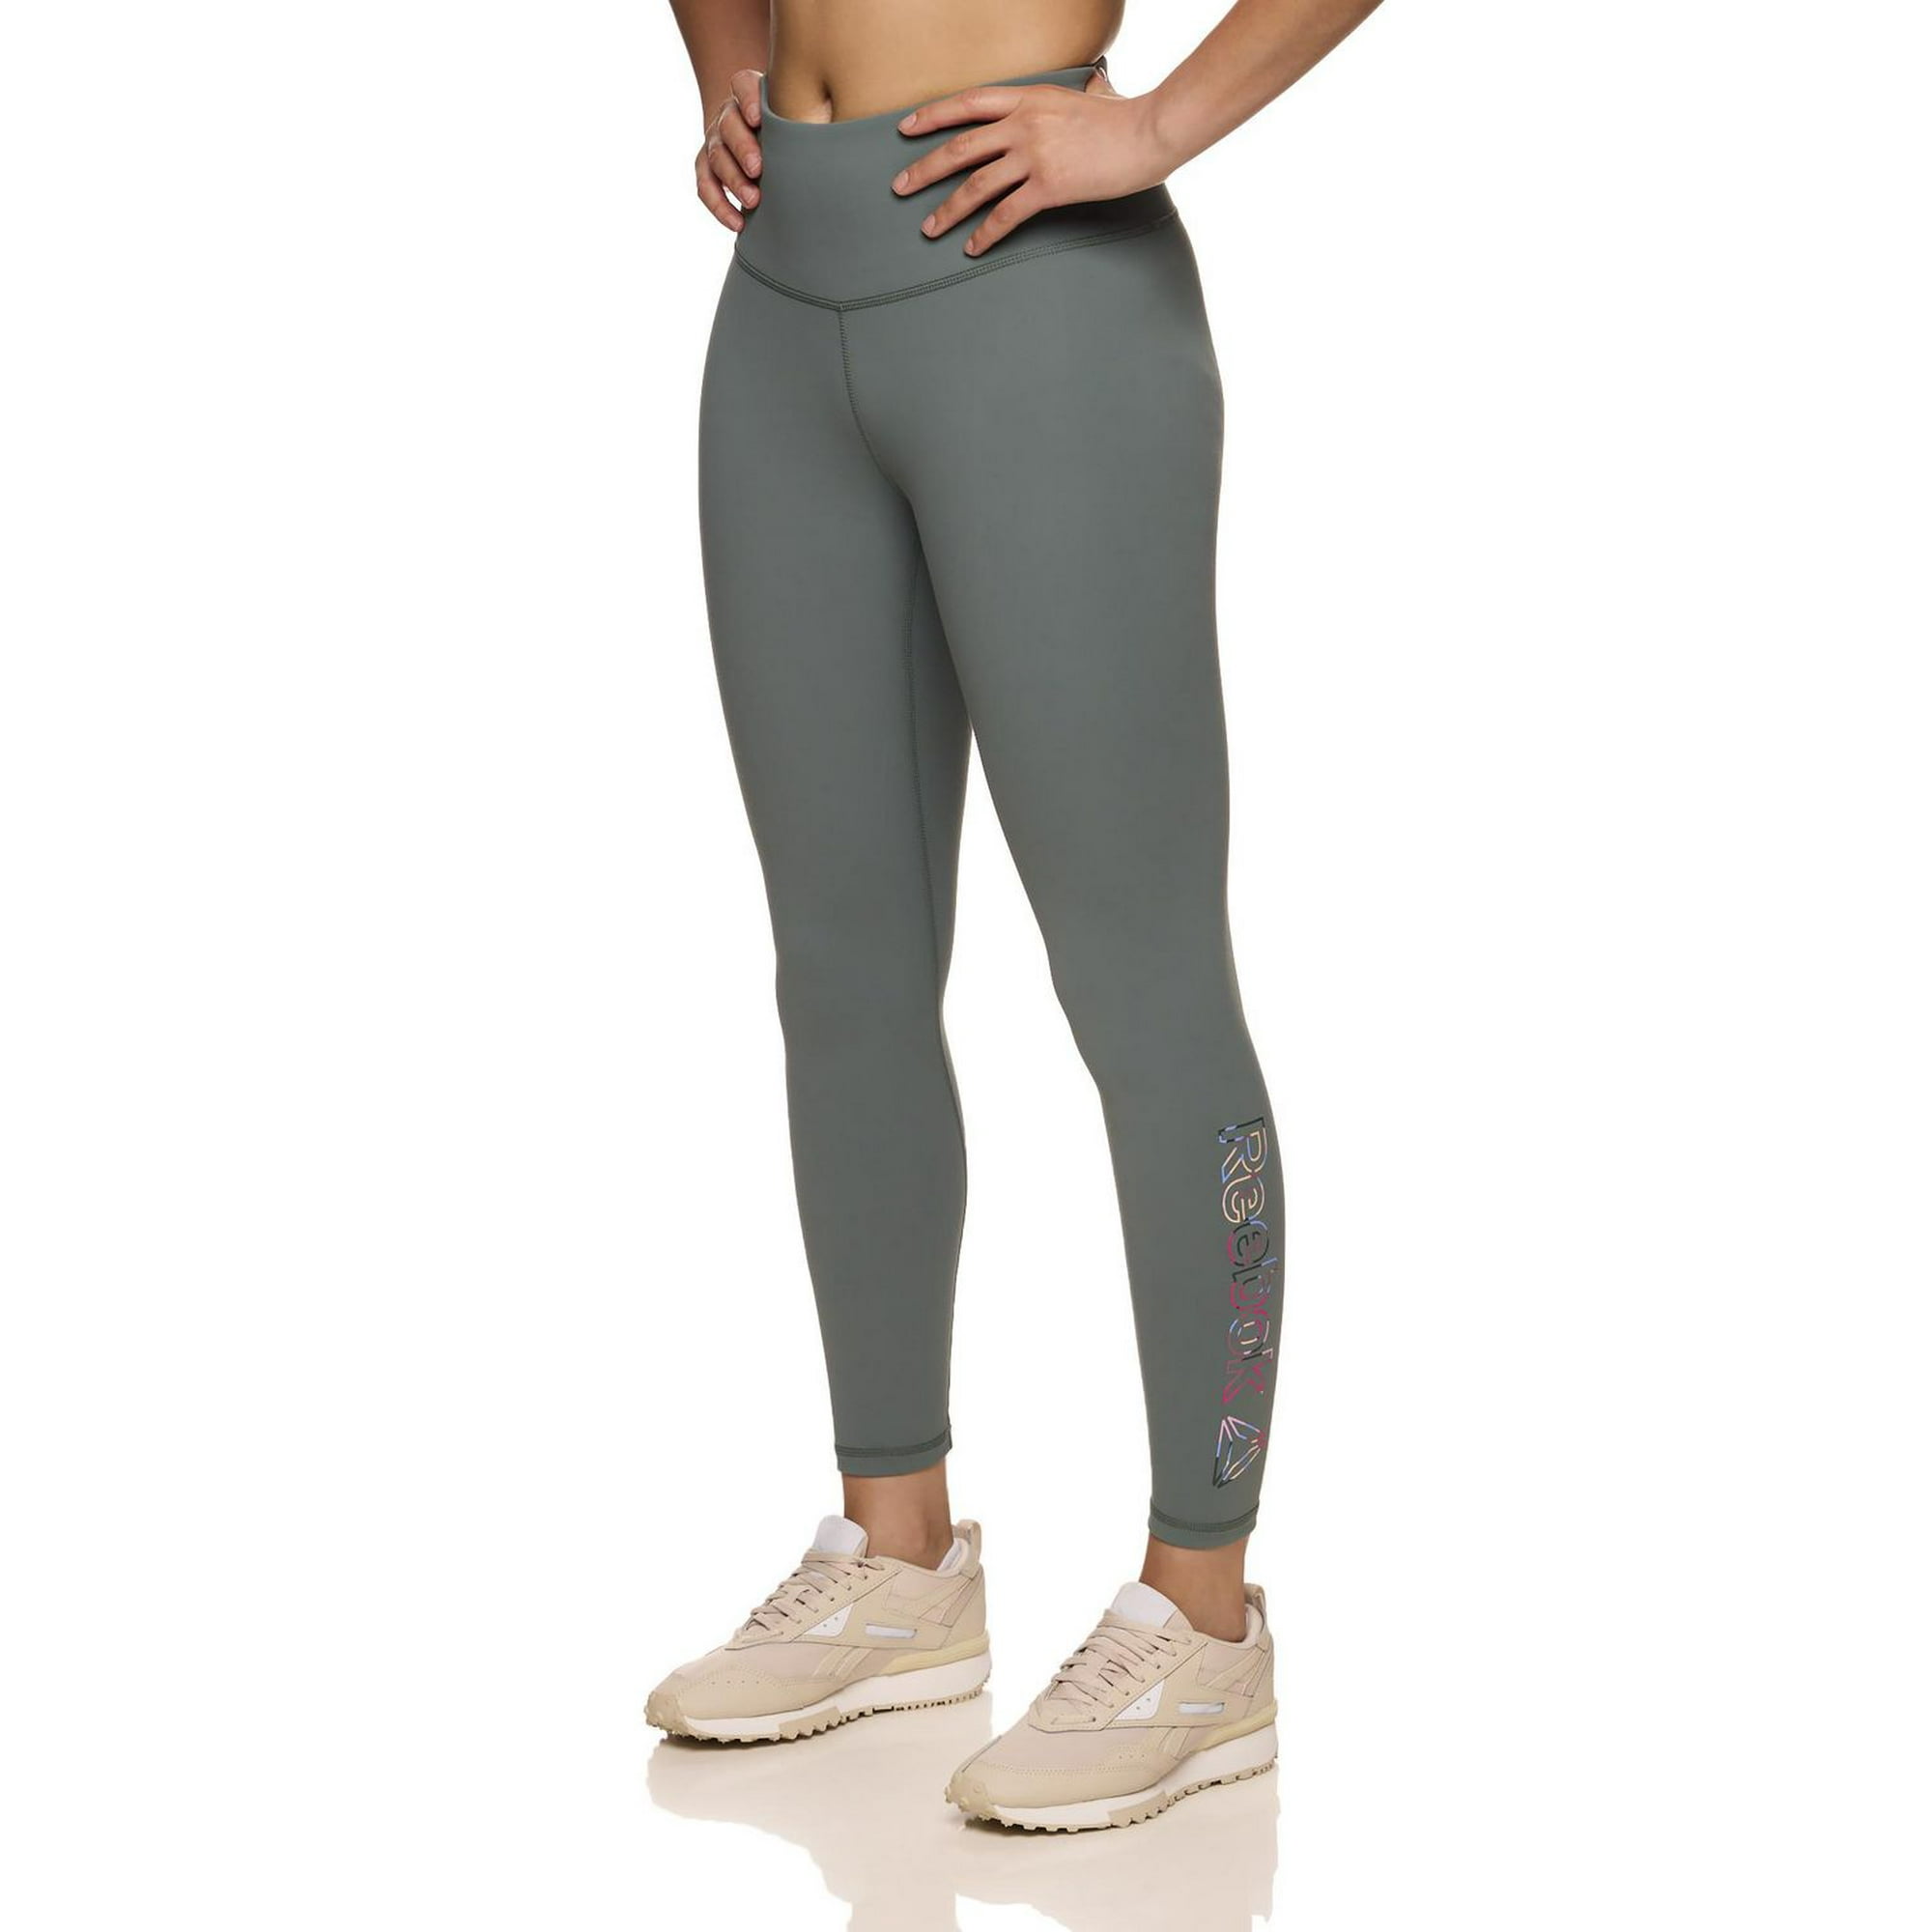 Reebok Women's Solid Print High Rise 7/8 Legging with 25 Inseam